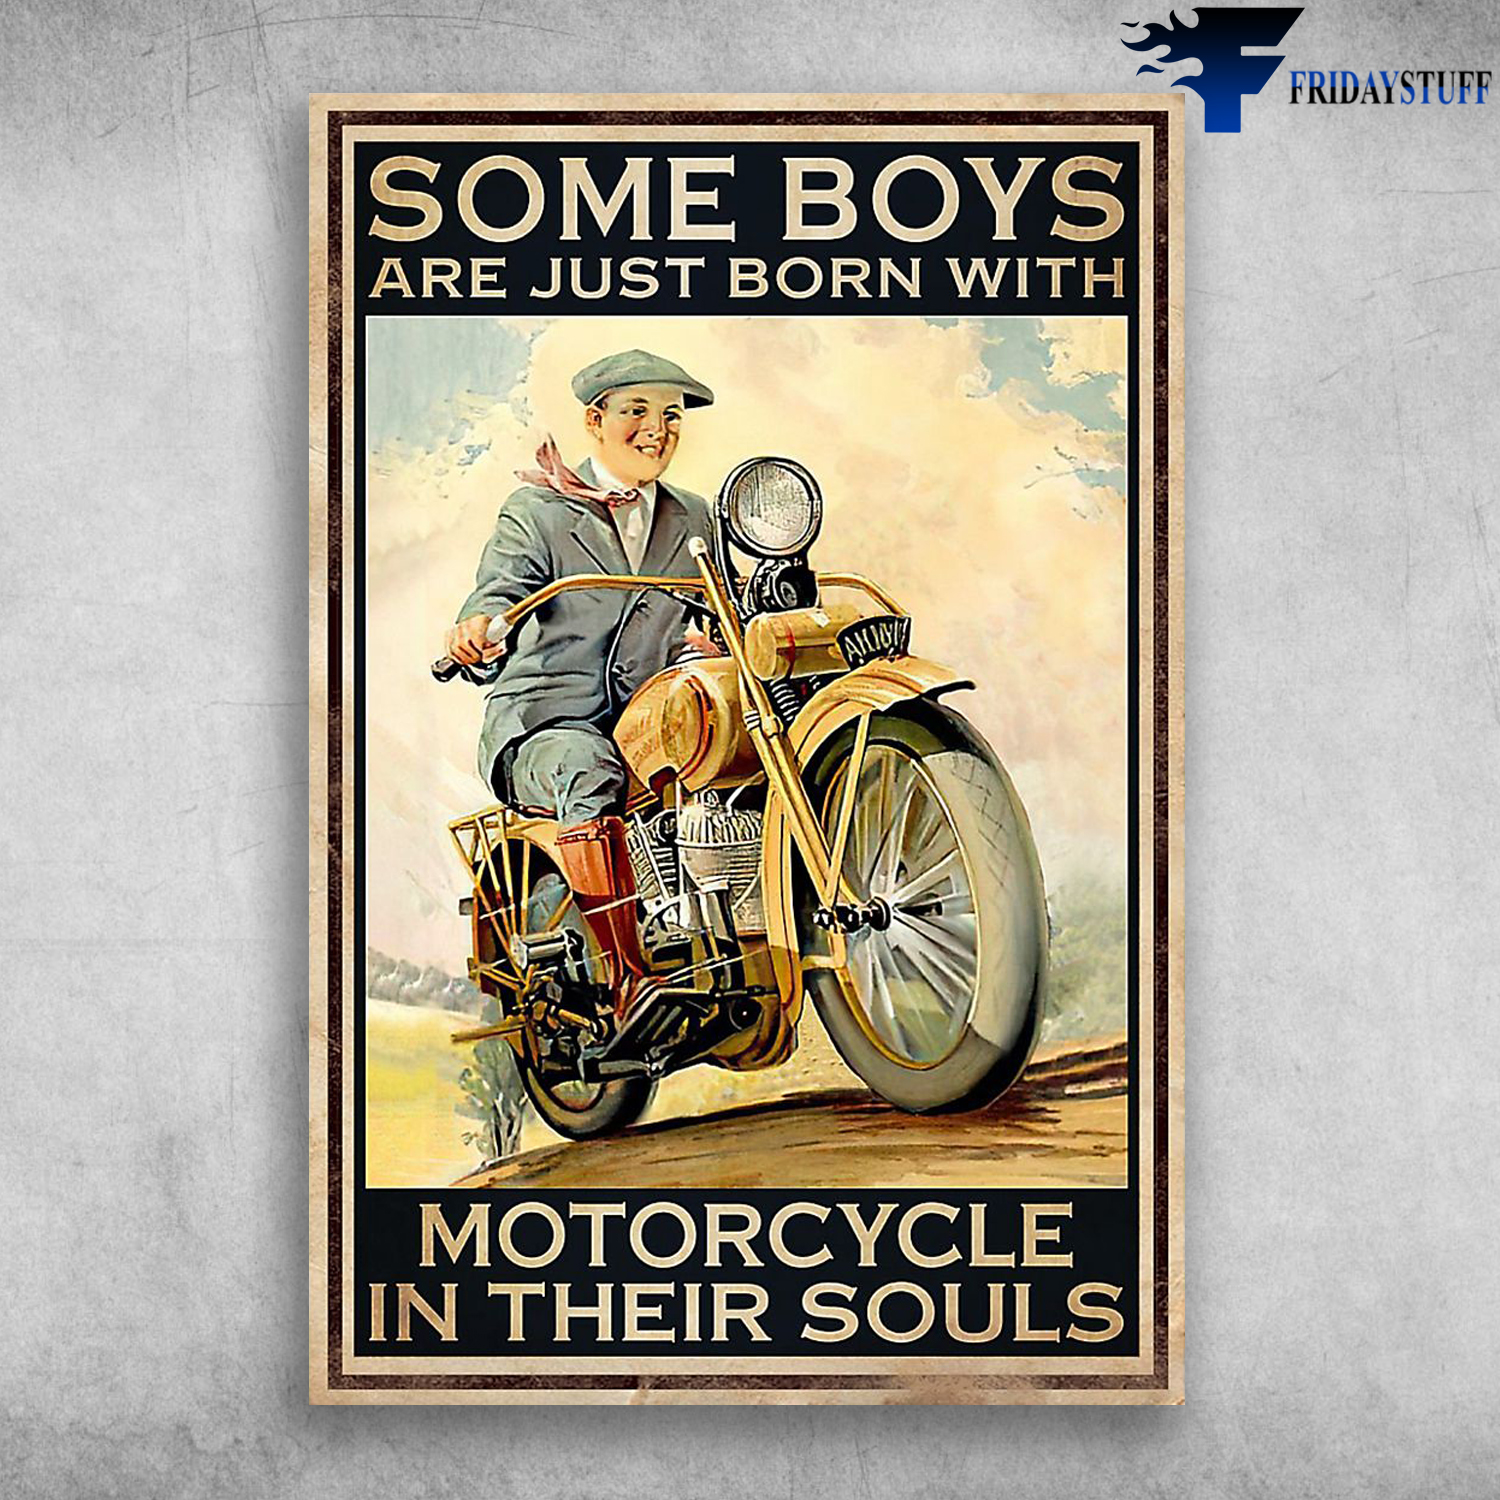 Some Boys Are Just Born With Motorcycle In Their Souls